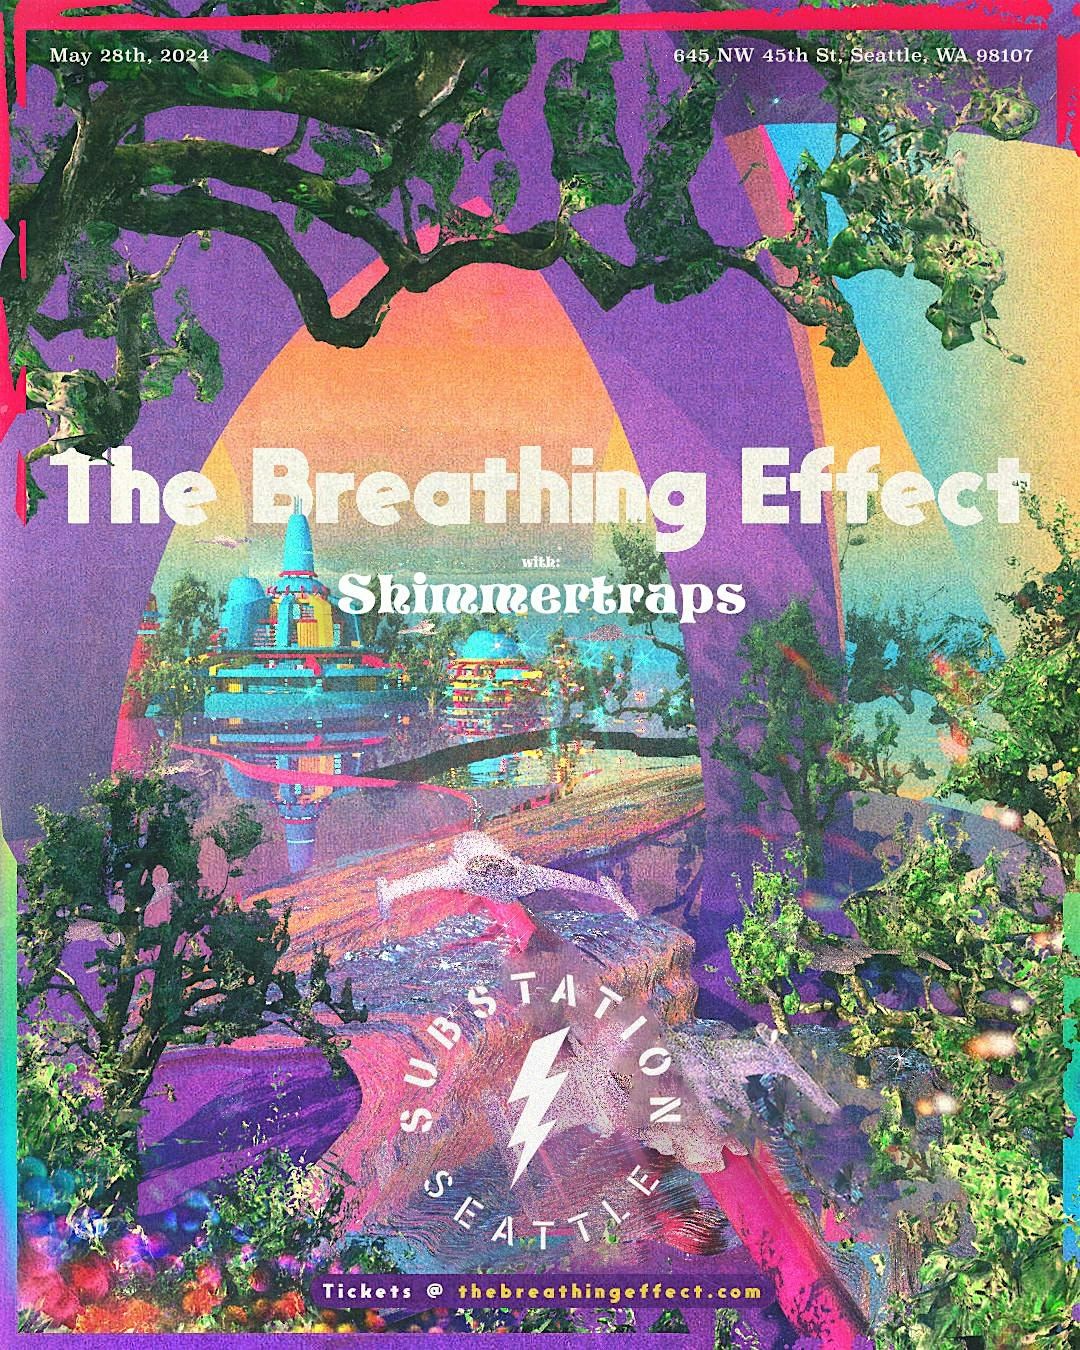 The Breathing Effect with Shimmertraps and guest